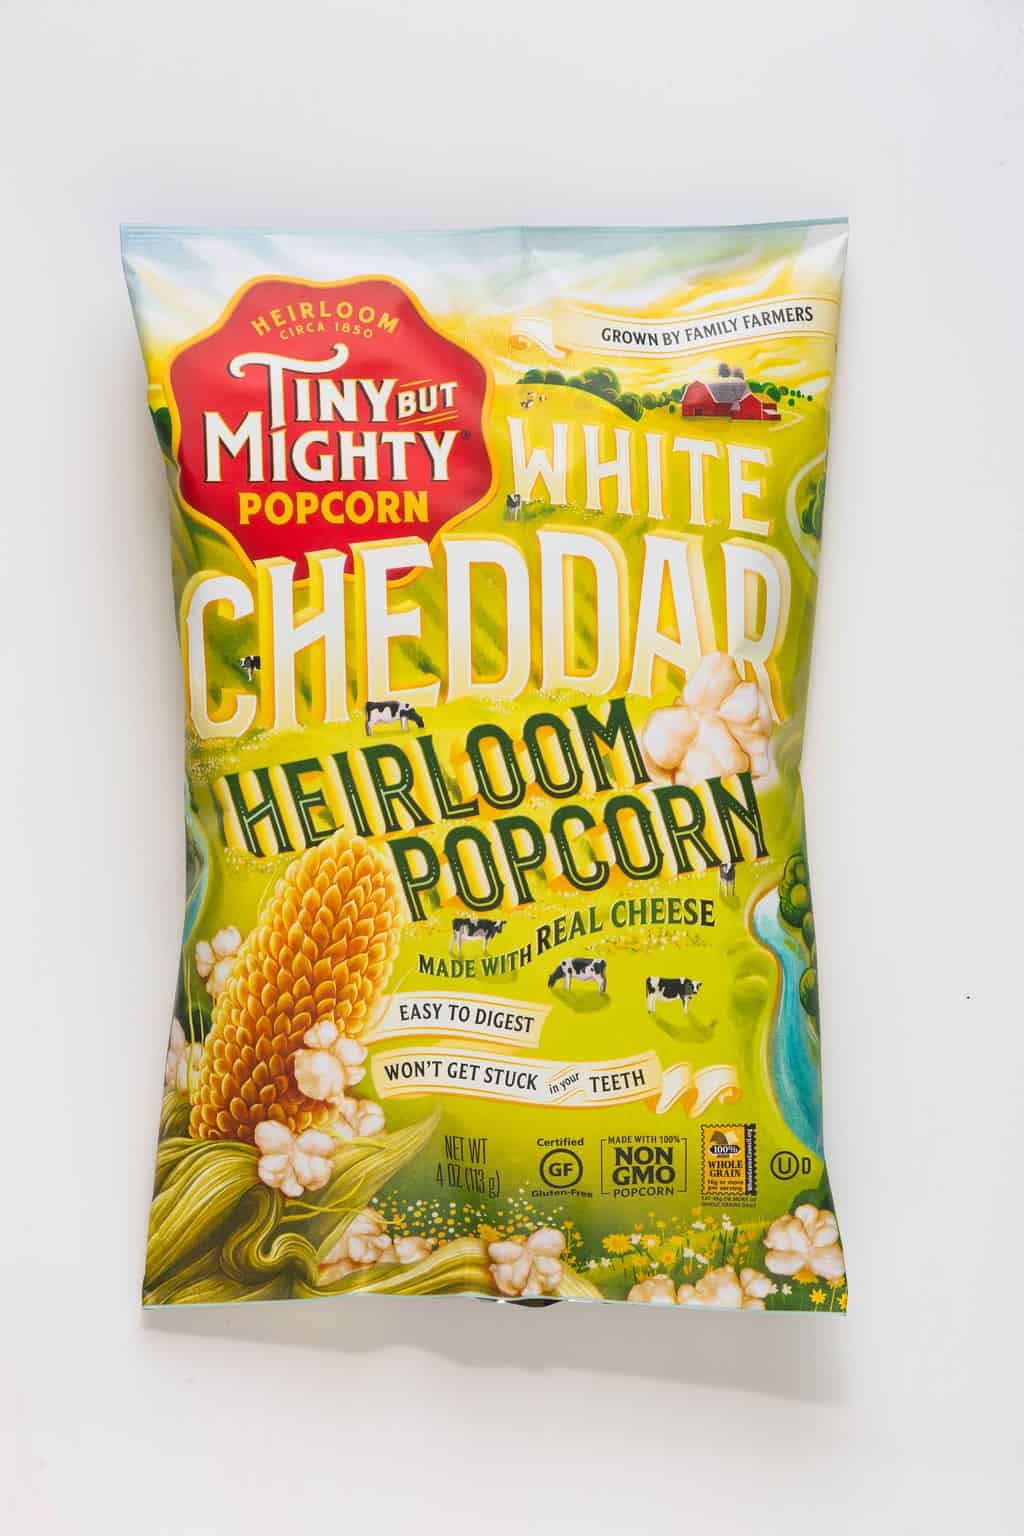 Tiny But Mighty Popcorn - American Grown Heirloom Popcorn From A Family Farm in Iowa #snacktime #usalovelisted #madeinUSA 